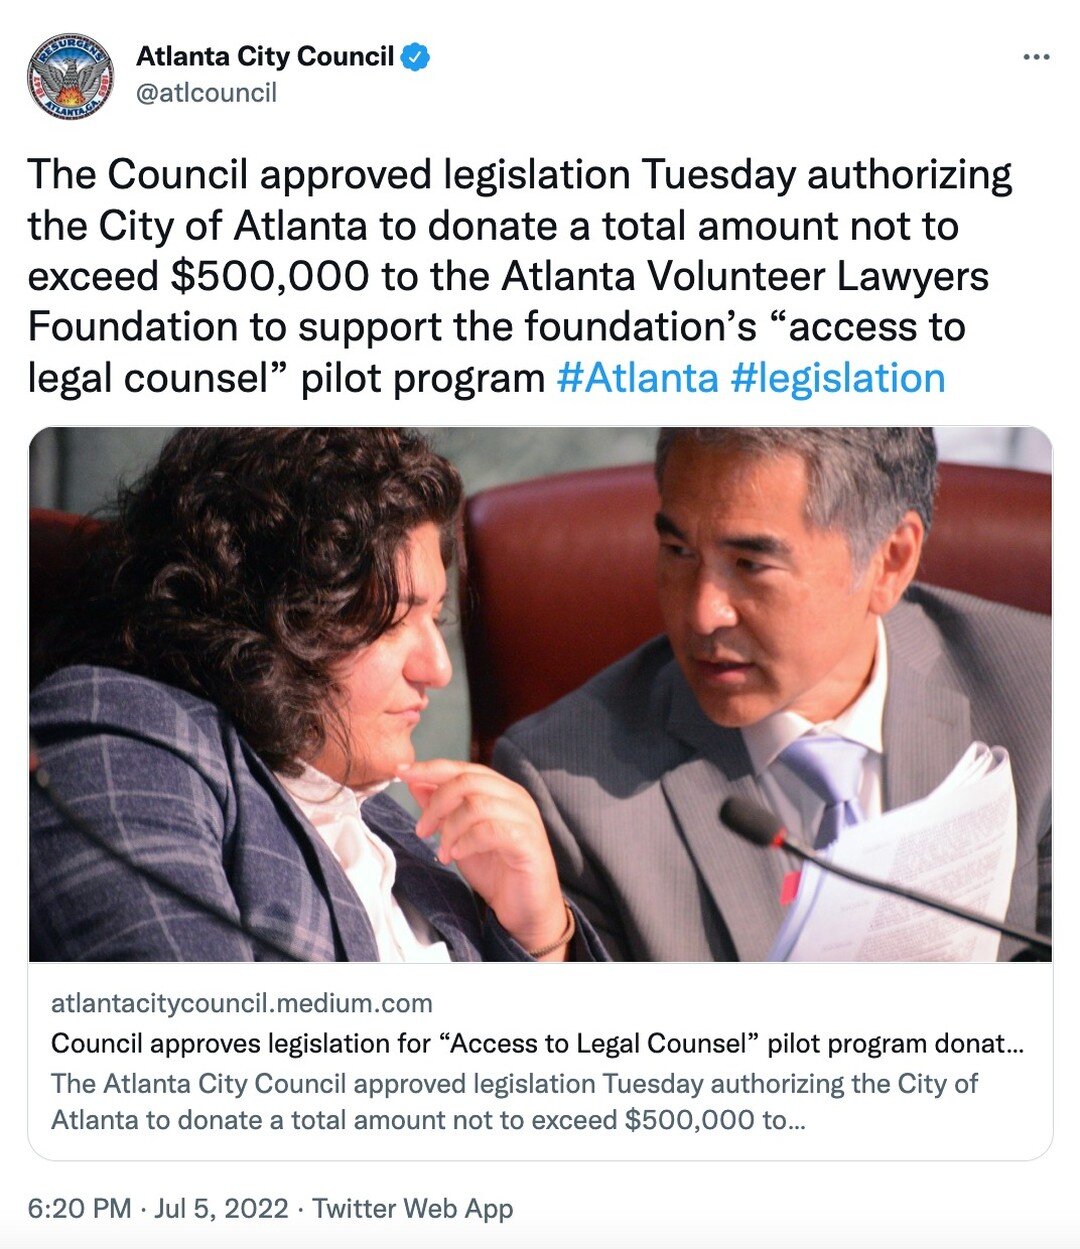 Providing free legal counsel to tenants facing eviction is one of the biggest and easiest ways to balance the scales when landlords have all the power

This pilot program with @supportavlf is a first step towards ensuring Atlanta renters are ALWAYS r